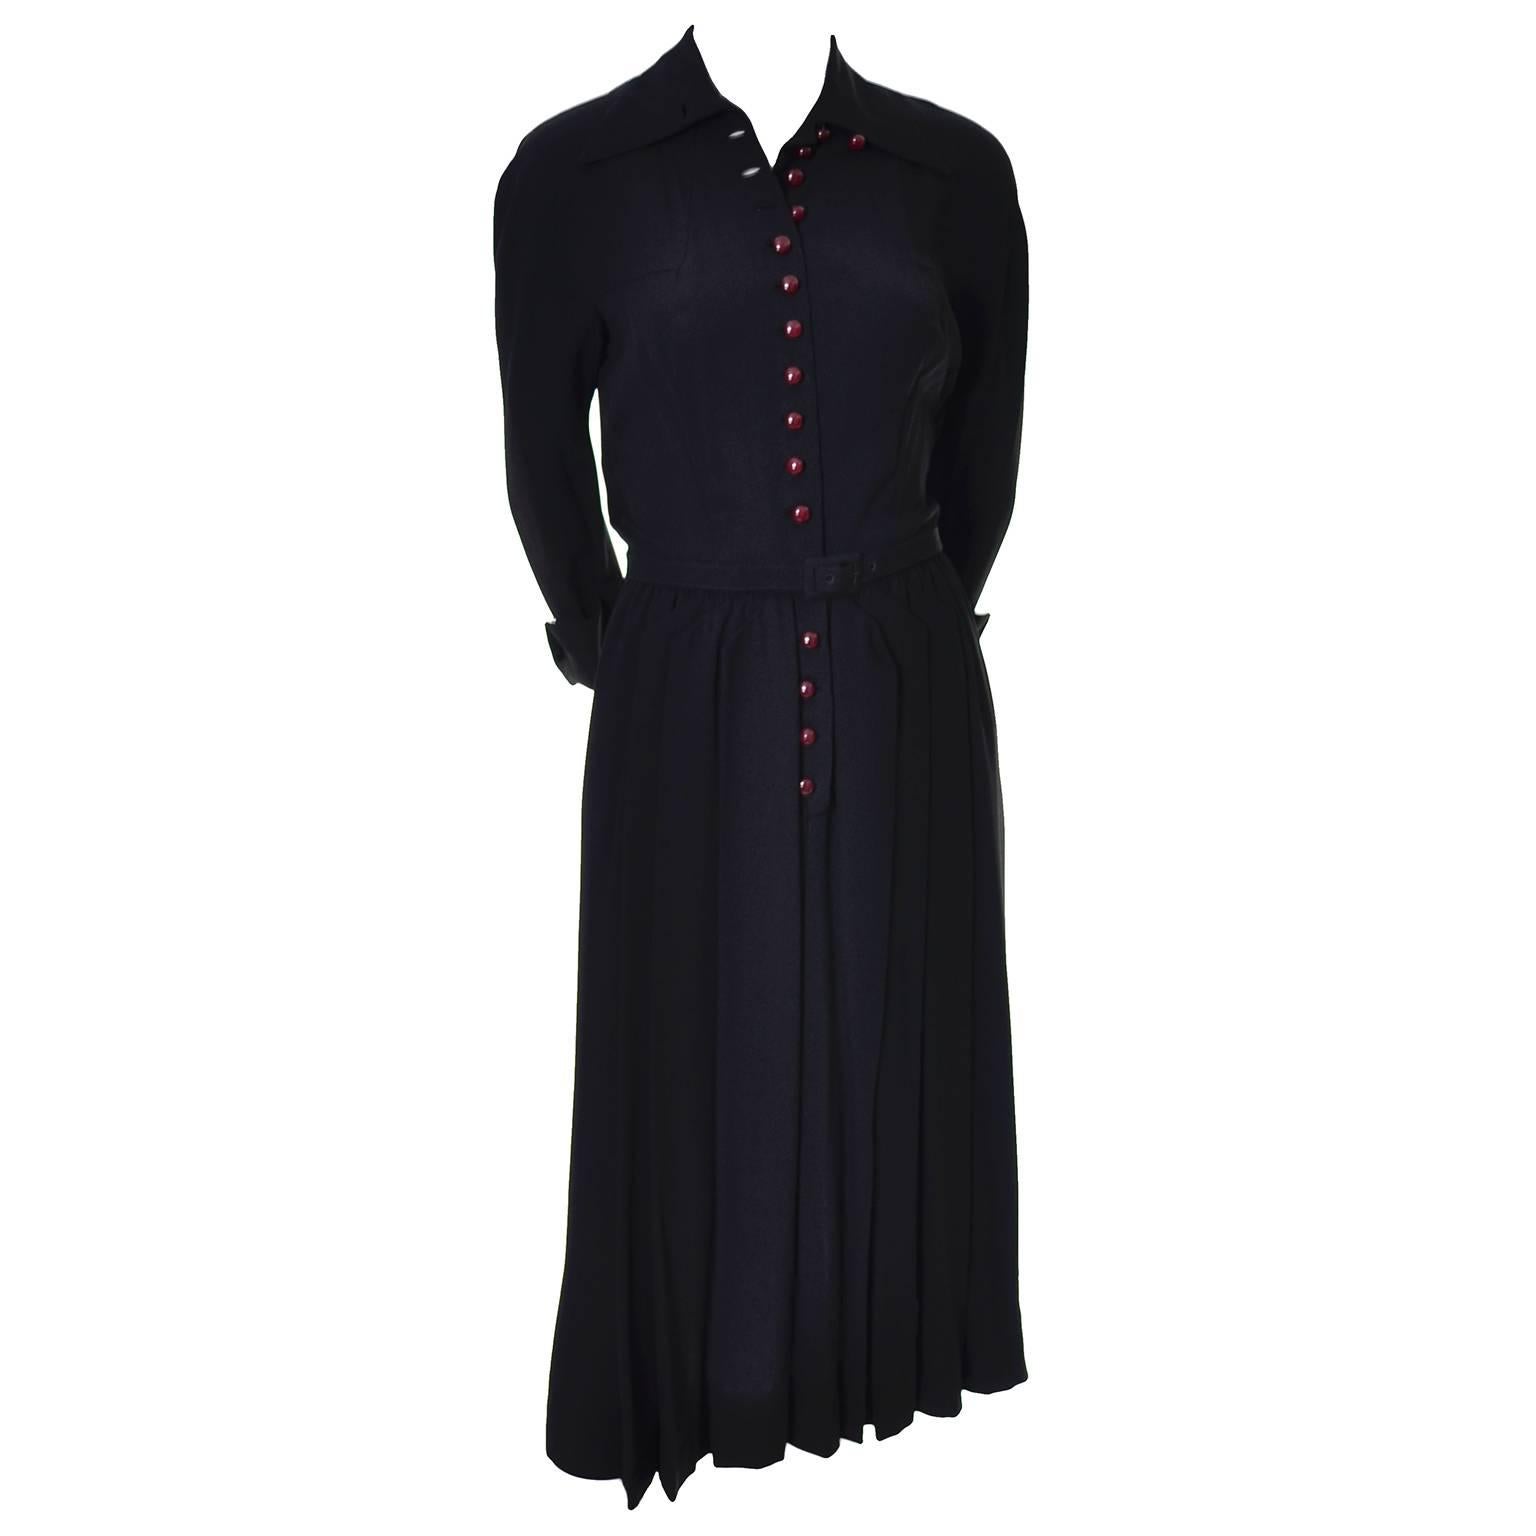 1940s Early Adele Simpson Vintage Rayon Crepe Dress With Unique Details 1